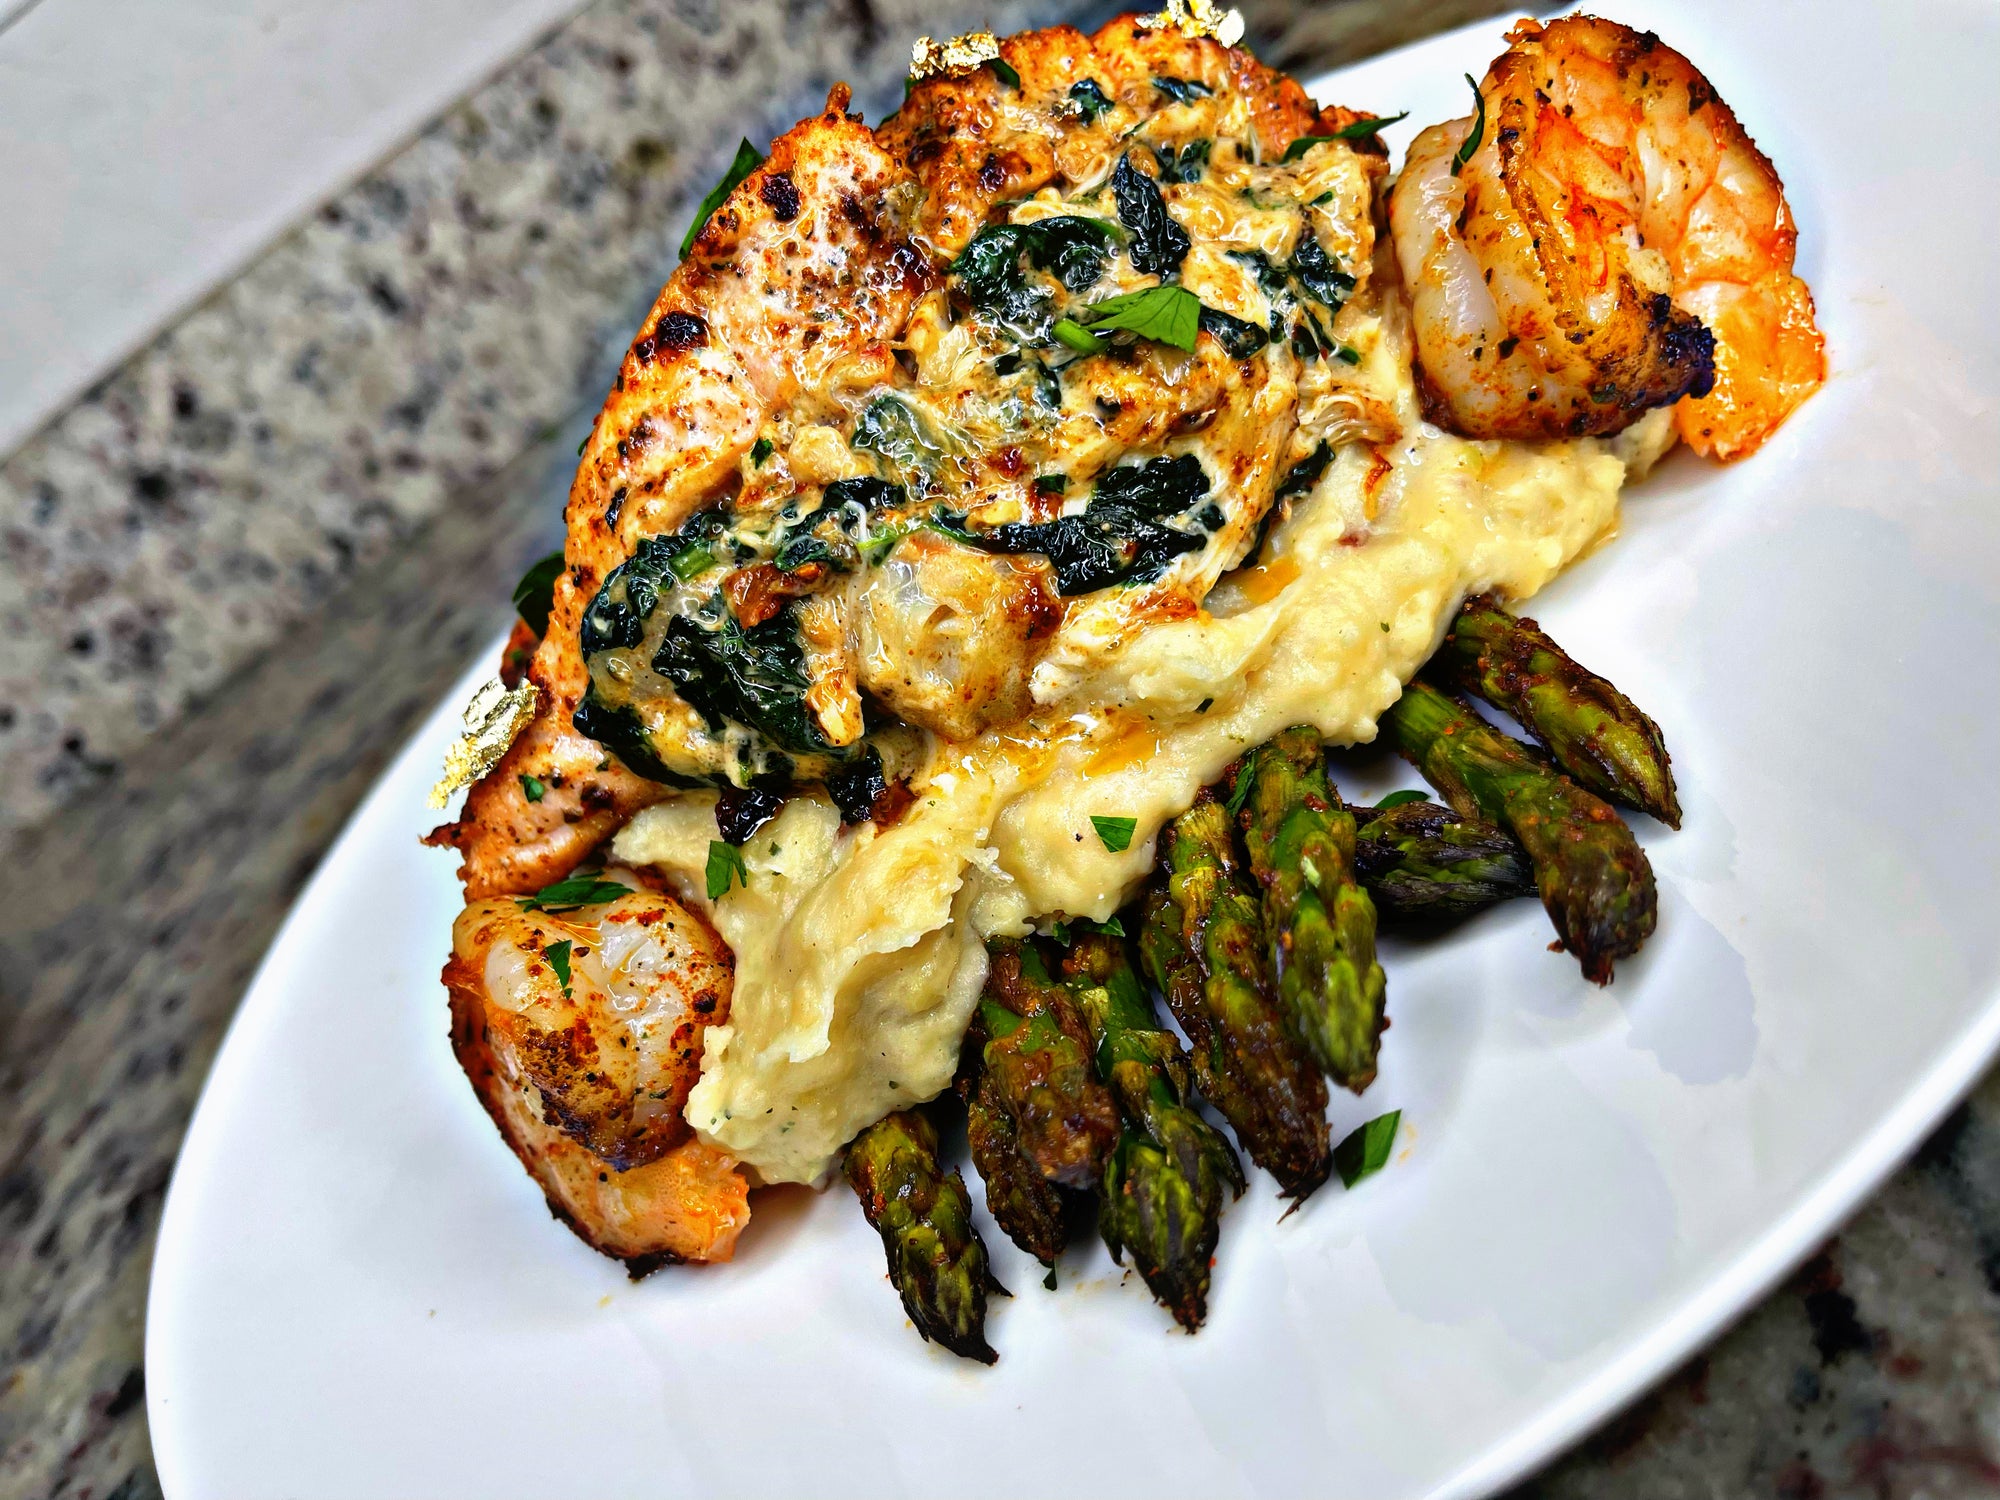 Stuffed salmon with red mashed potatoes and roasted asparagus!